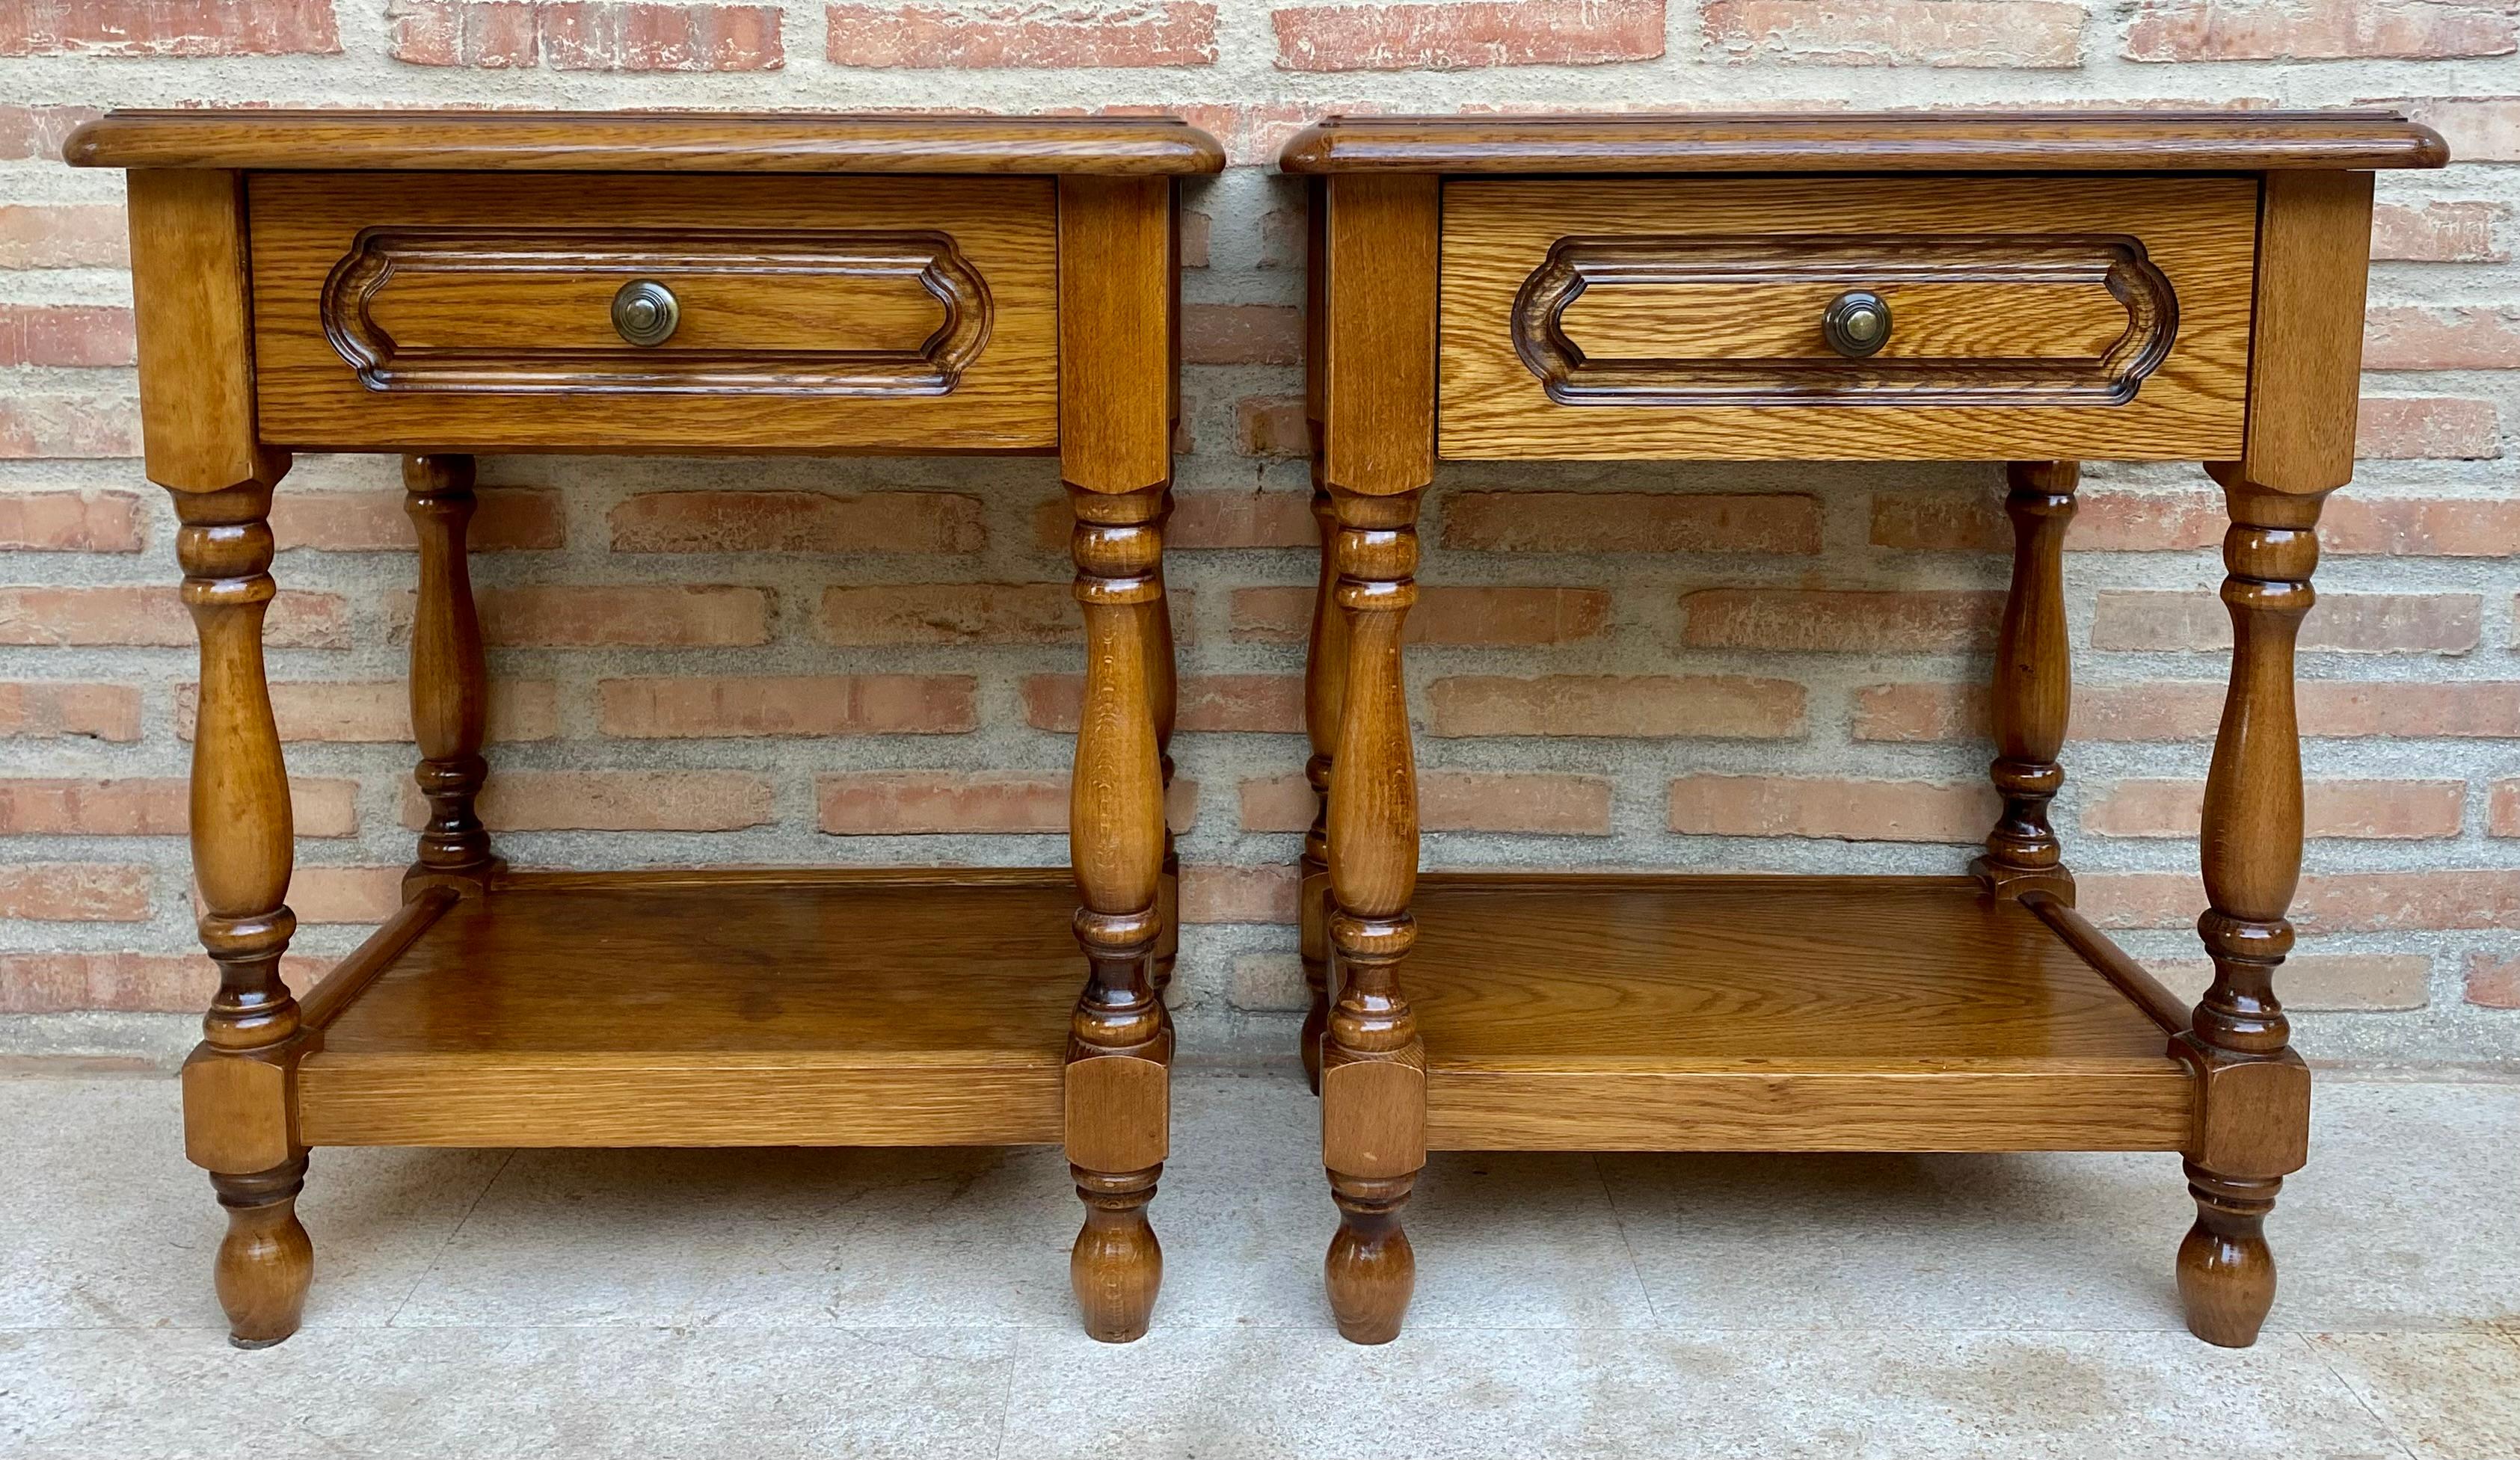 20th Century Pair Of Spanish Nightstands with One Drawer And Iron Hardware and One Open Shelf.
20th century pair of Spanish nightstands in solid walnut with one drawer, iron hardware and round carved legs.
Beautiful tables that you can use like a